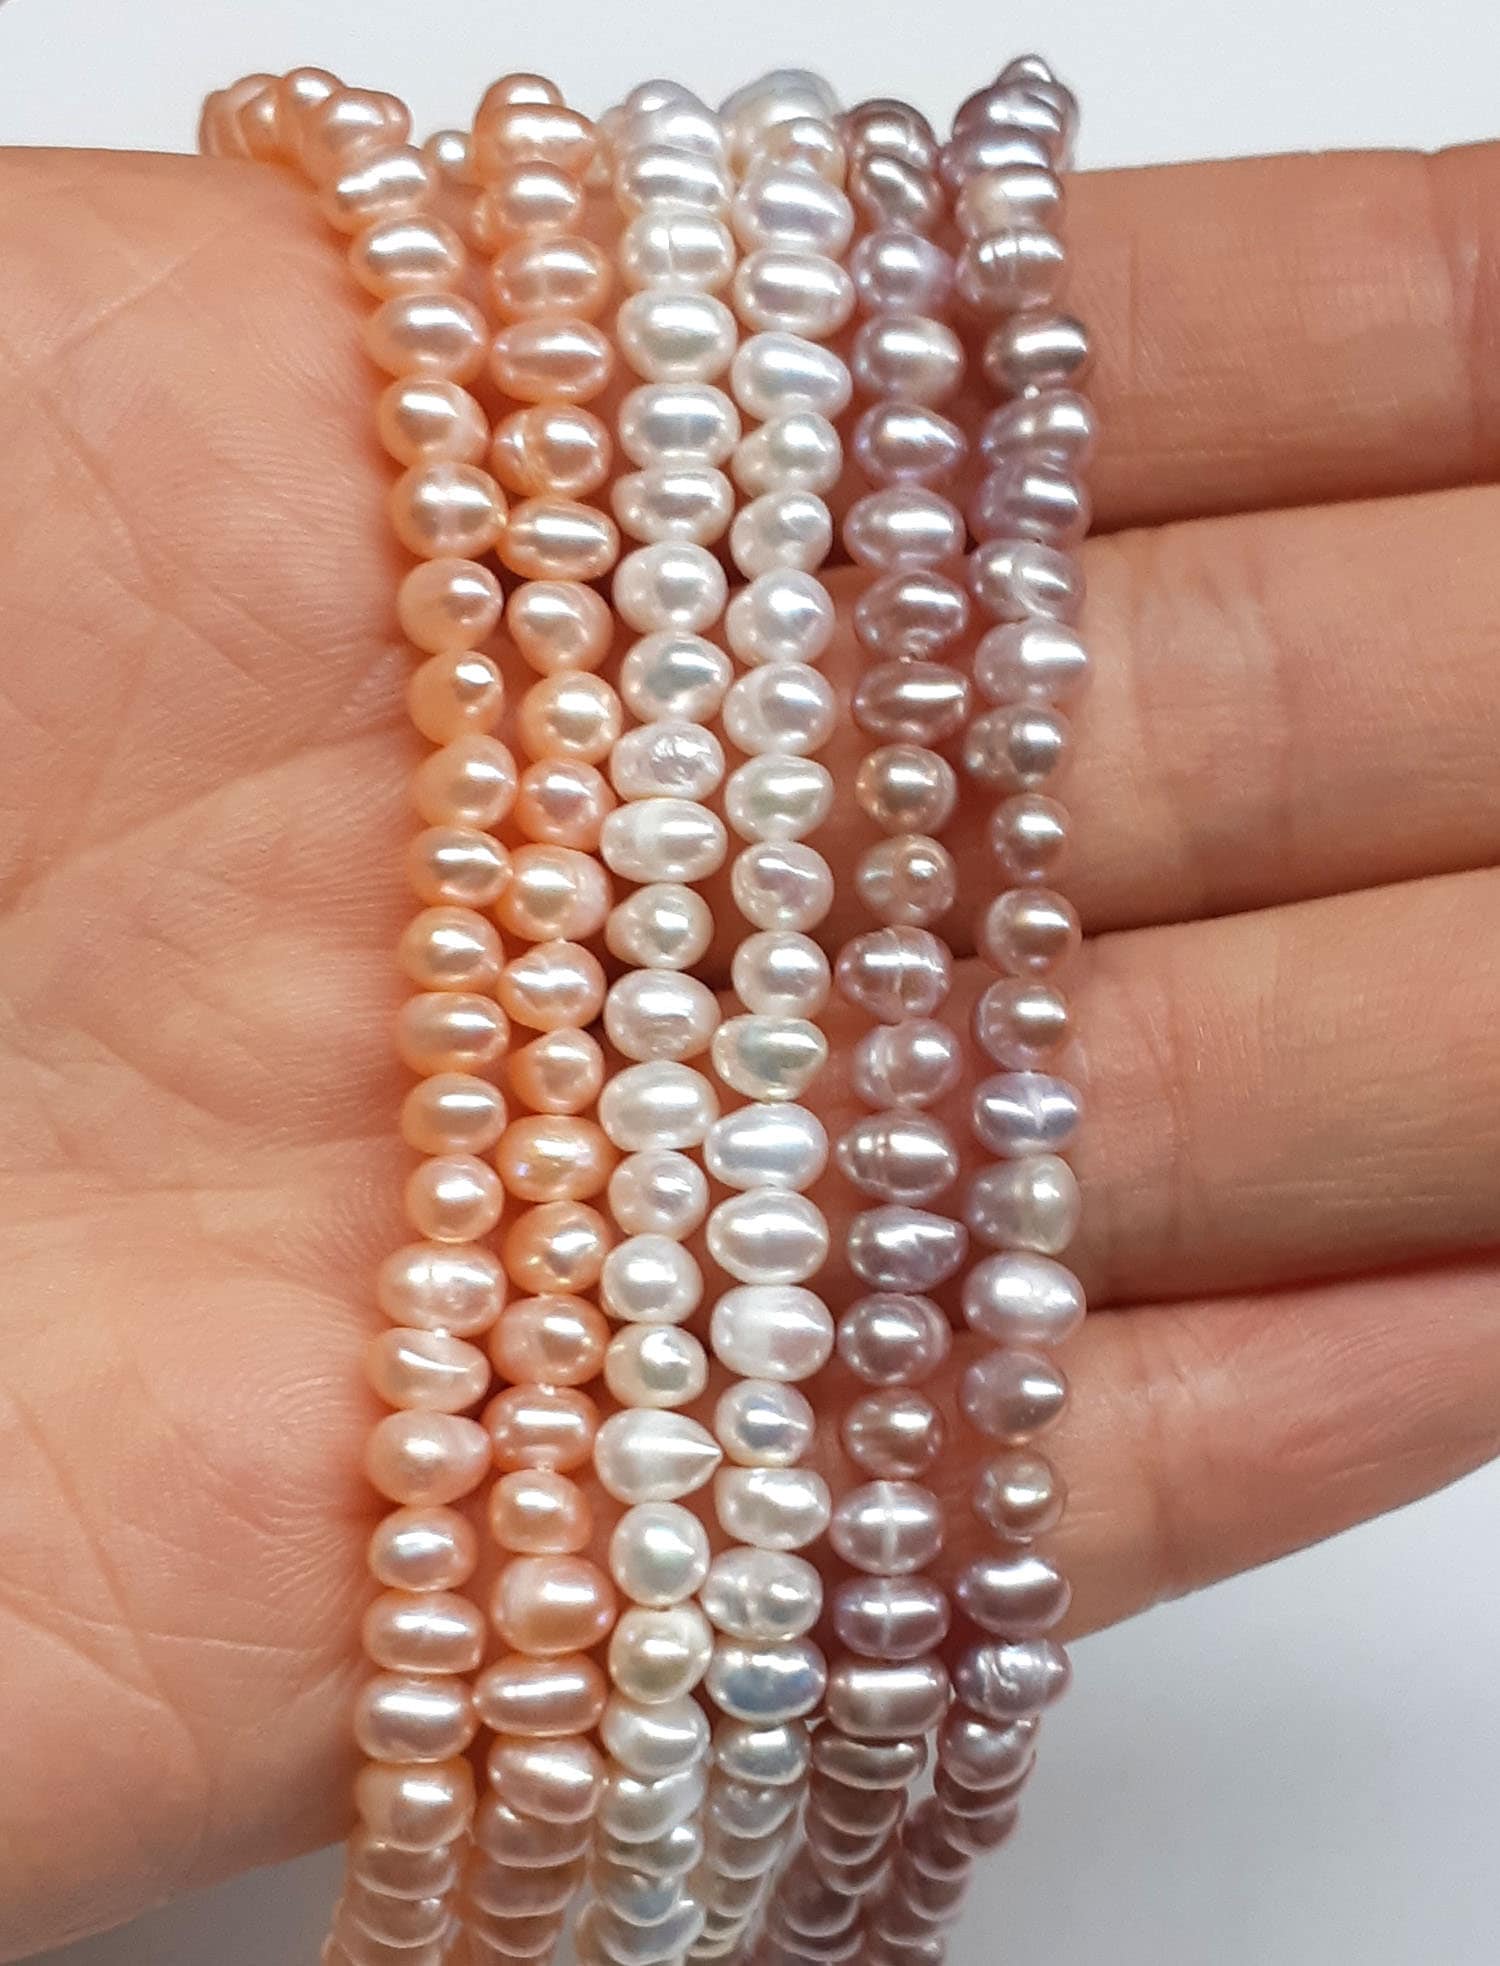 3-4,8-9mm Freshwater Pearl Black Freeform Loose Natural Stone Beads Strand 14.5" 